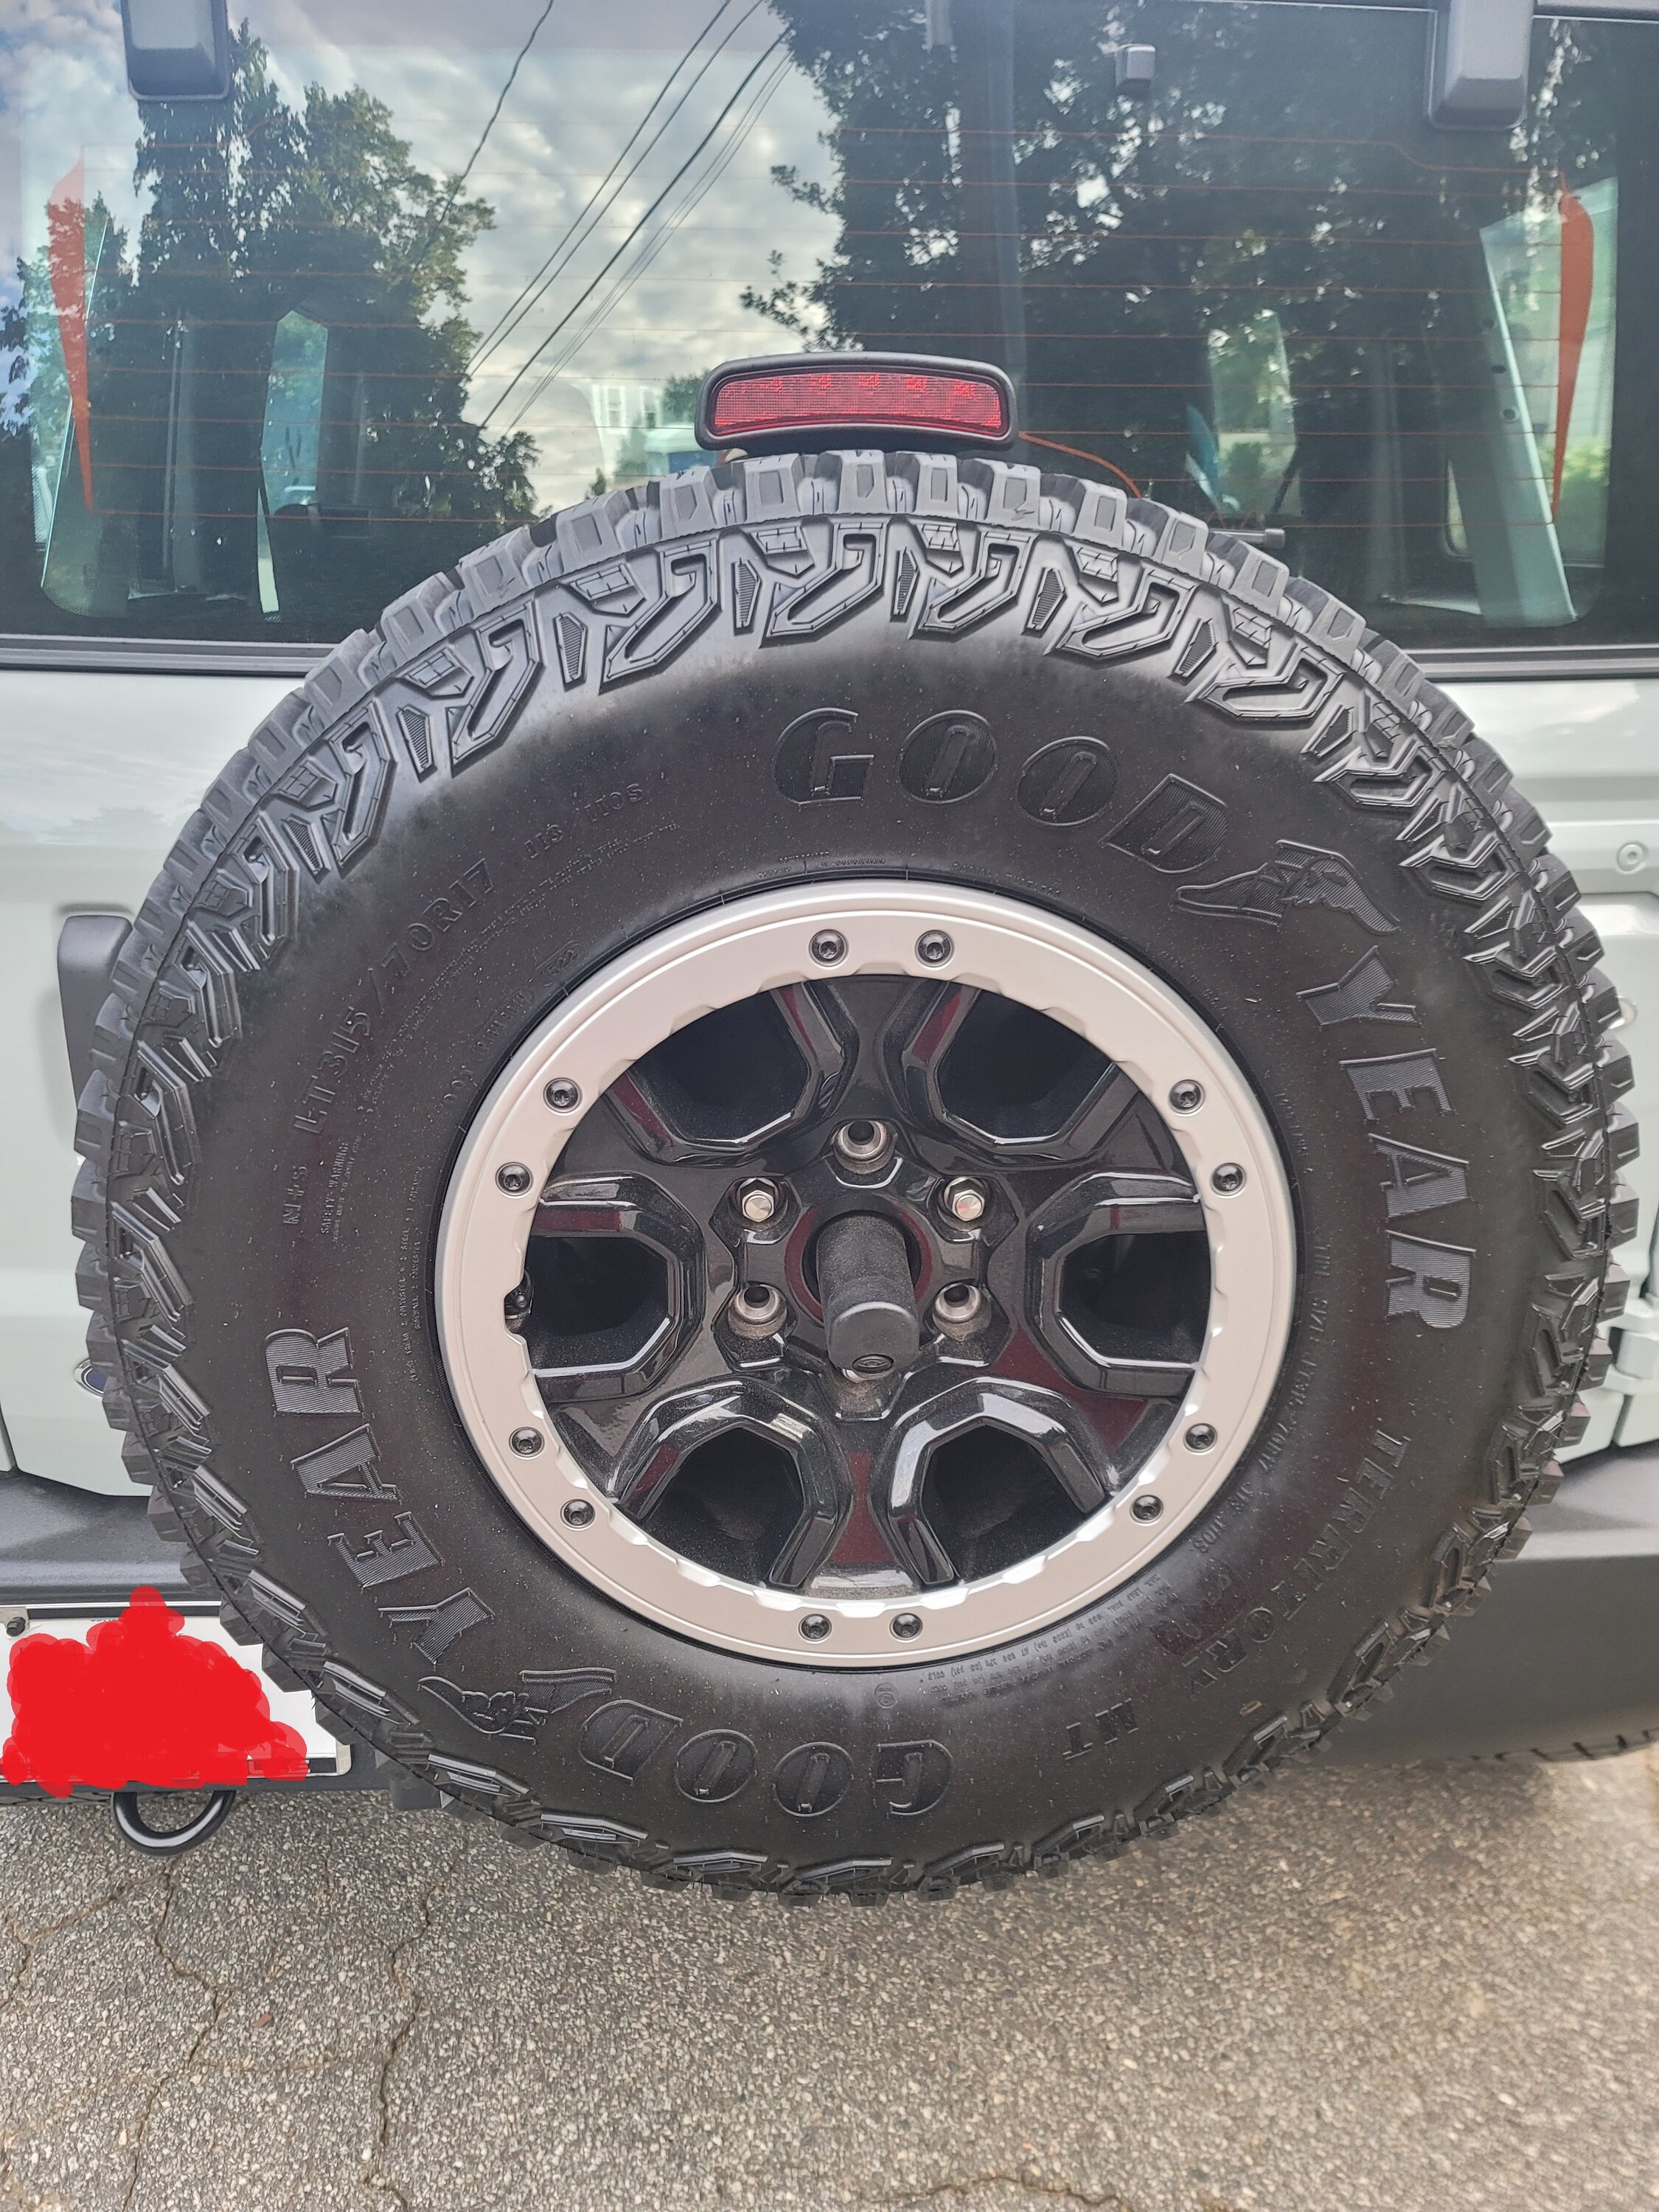 Ford Bronco Sasquatch Wheels and Tires - (Full Set Of 5) -- $1,800 20220811_080249